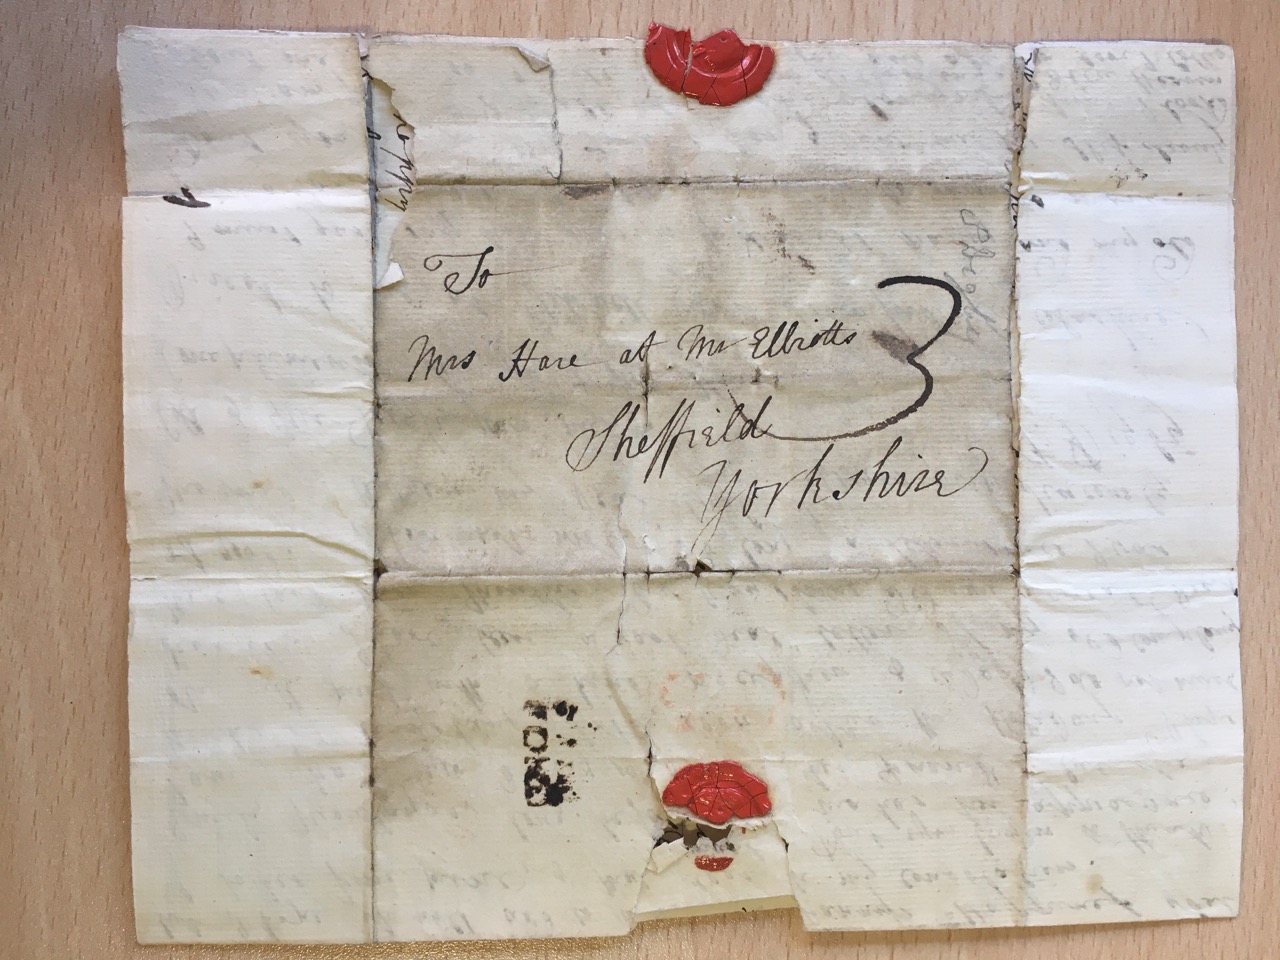 Image #4 of letter: S[ally] Digby and I Collier to Ann Hare, 27 December 1768